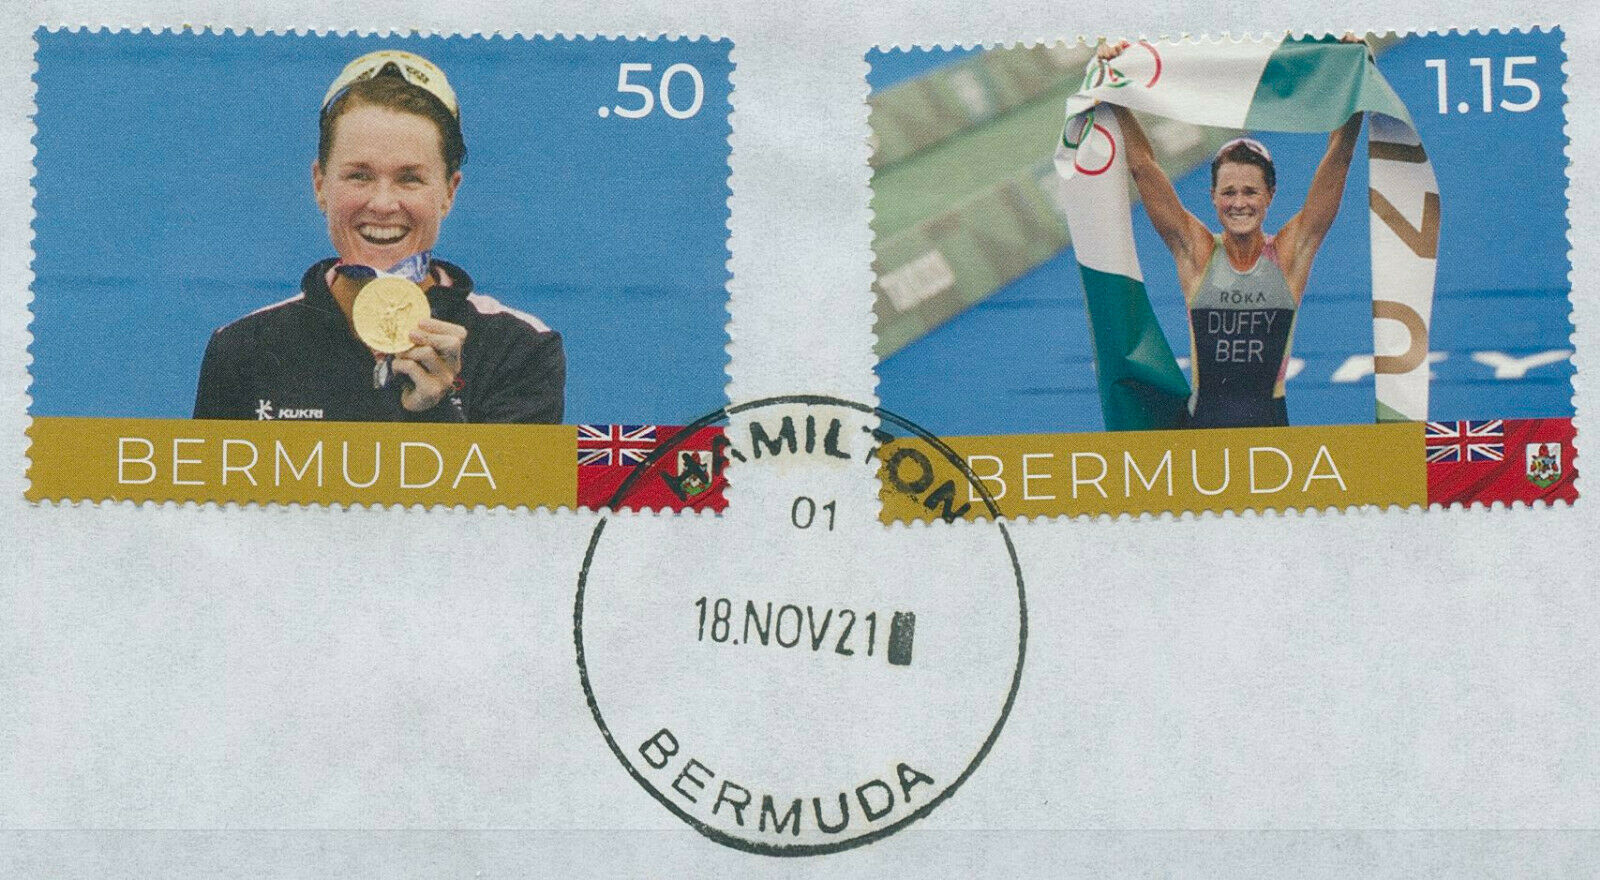 Bermuda 2021 CTO Olympics Stamps Flora Duffy Gold Medal Tokyo 2020 4v Set USED